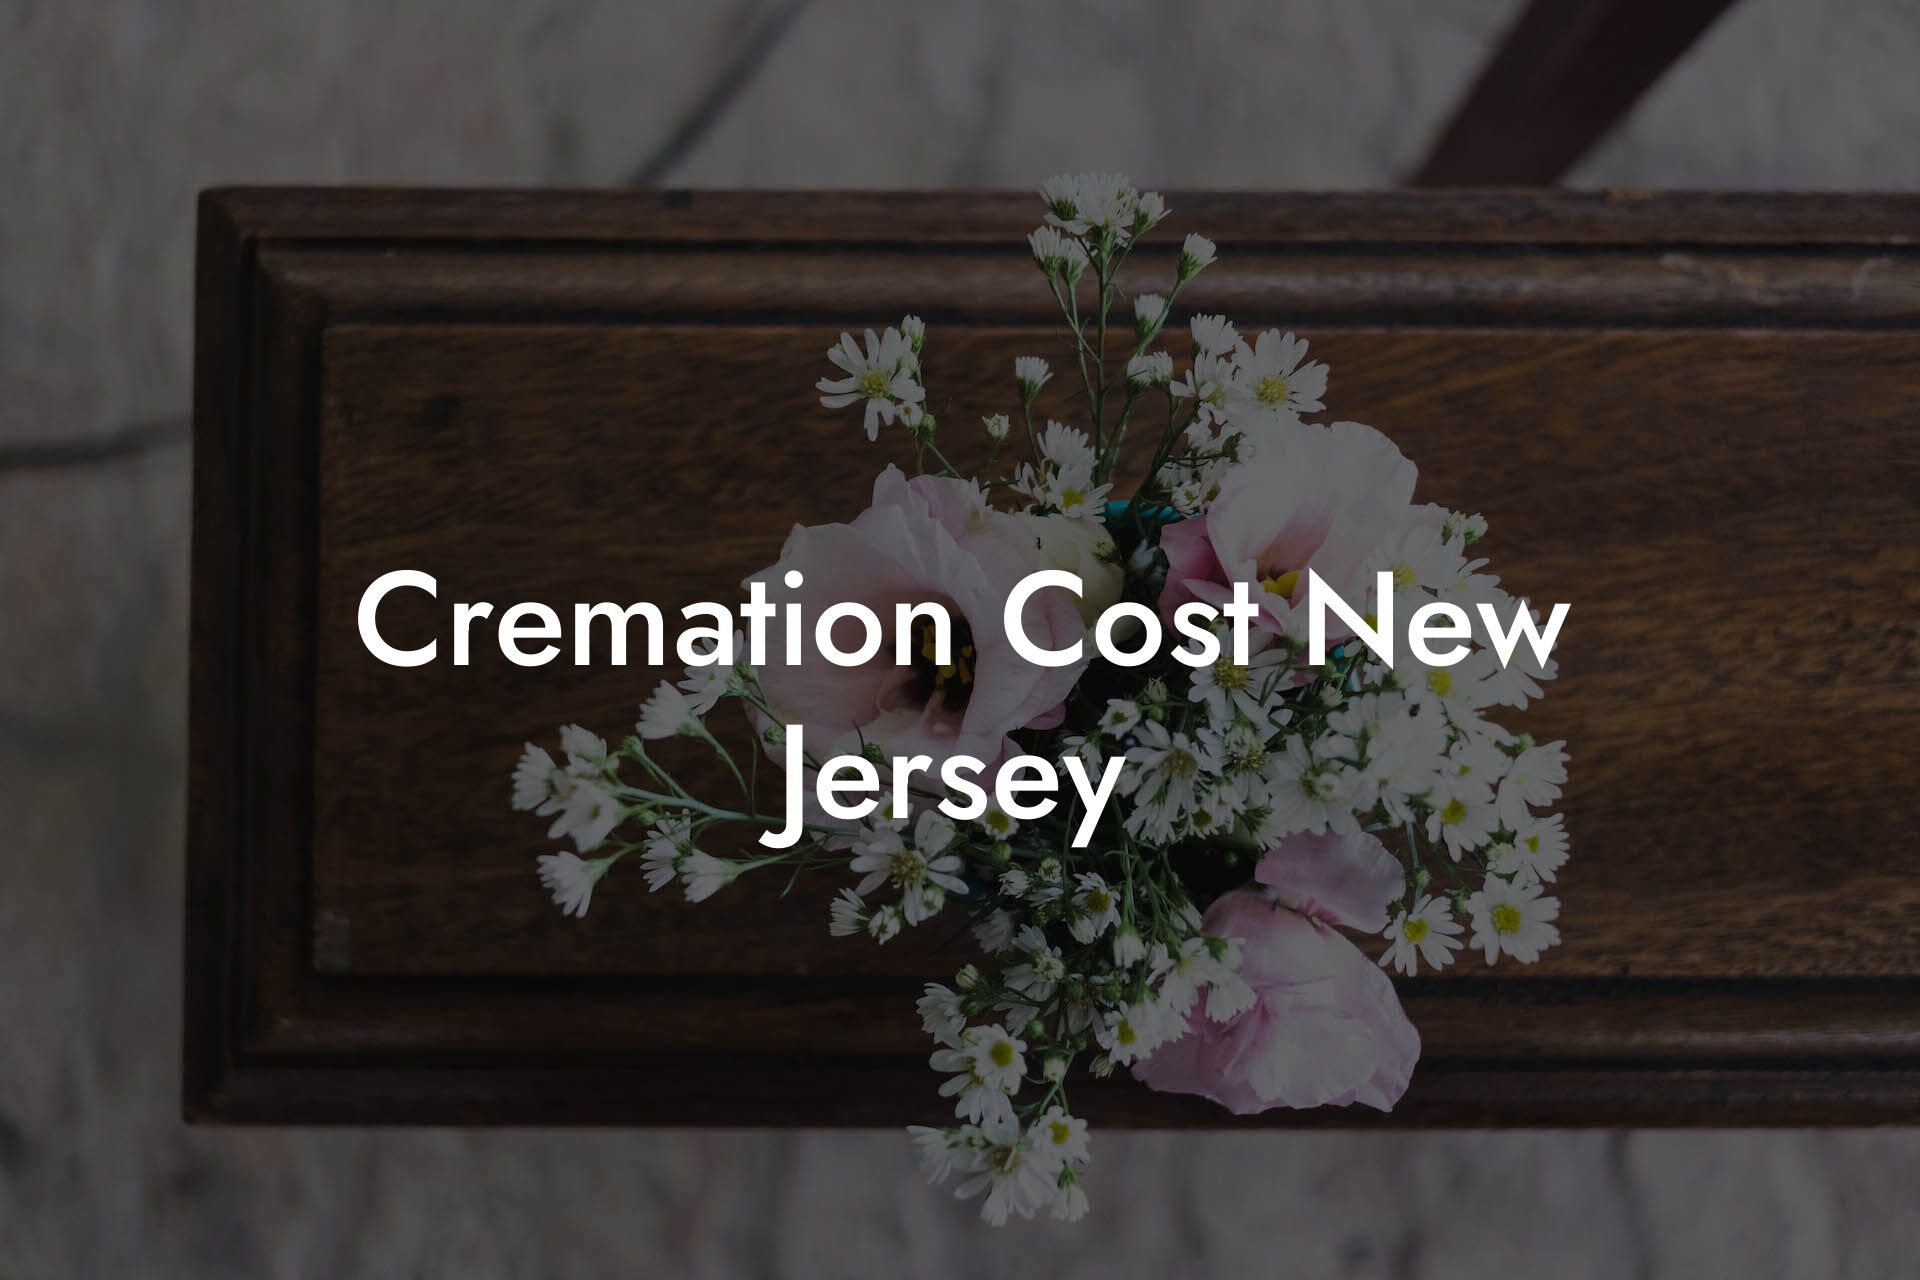 Cremation Cost New Jersey